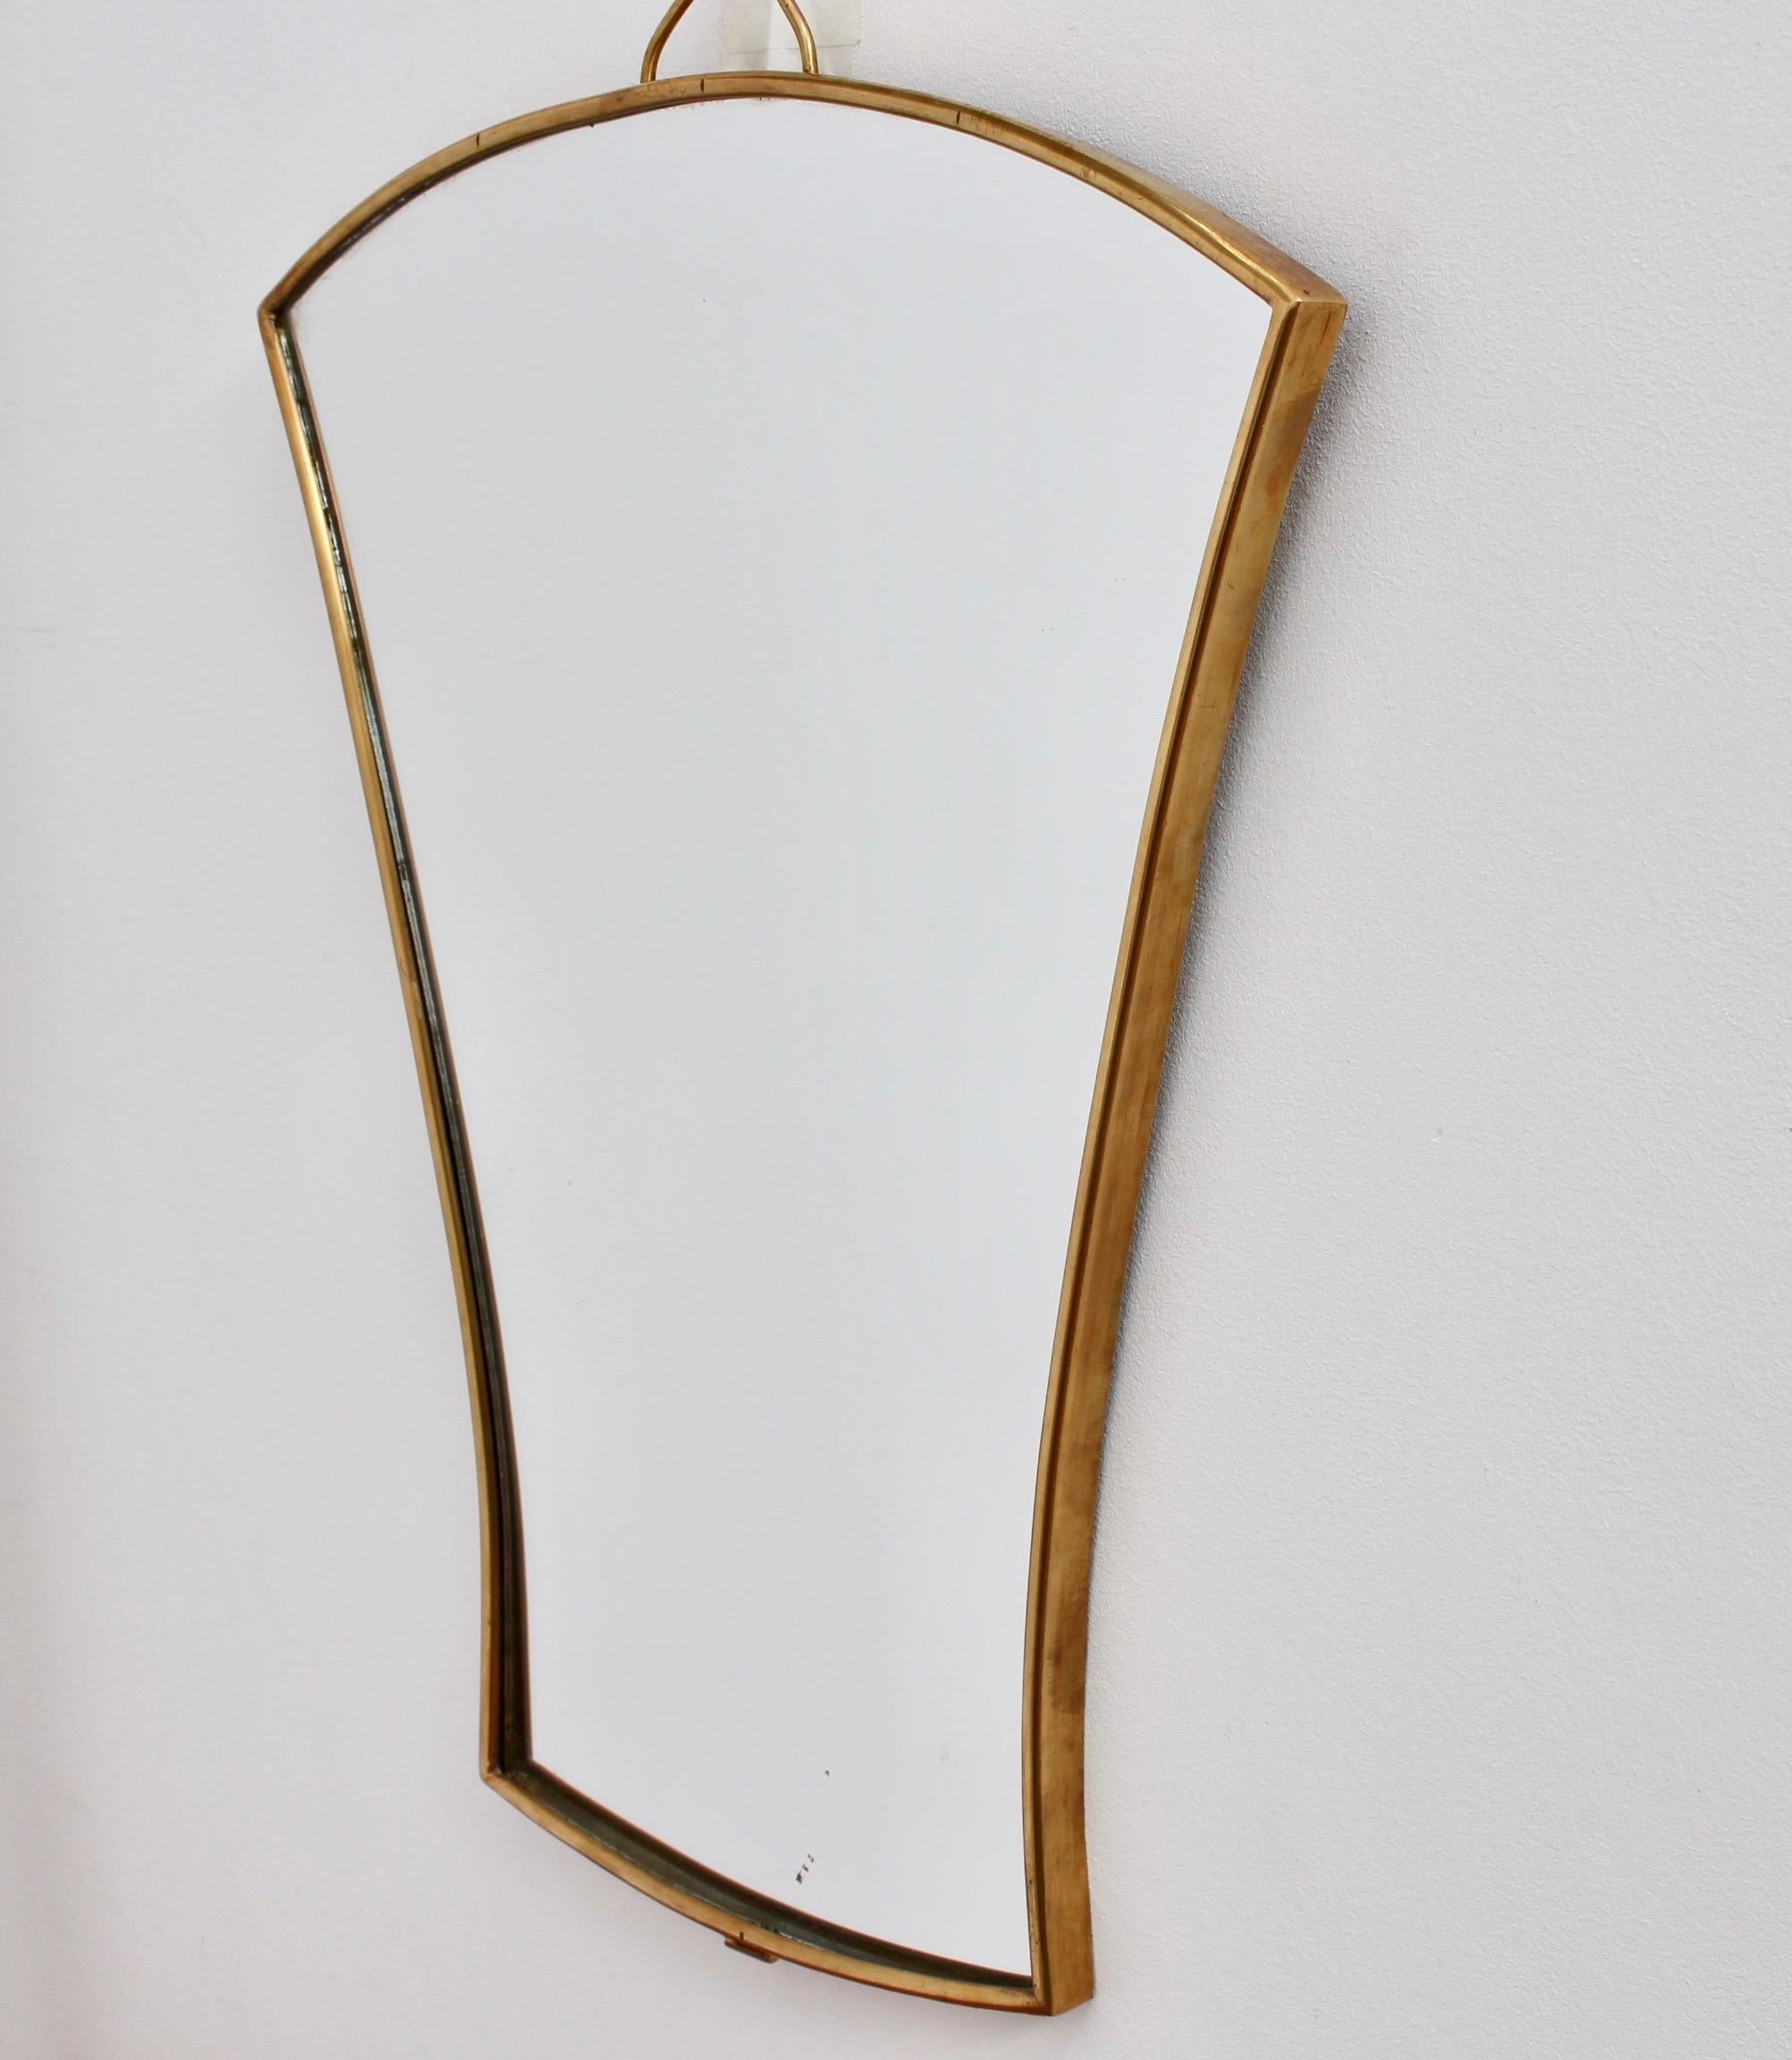 Midcentury Italian Fan-Shaped Wall Mirror with Brass Frame, circa 1950s, Small 4